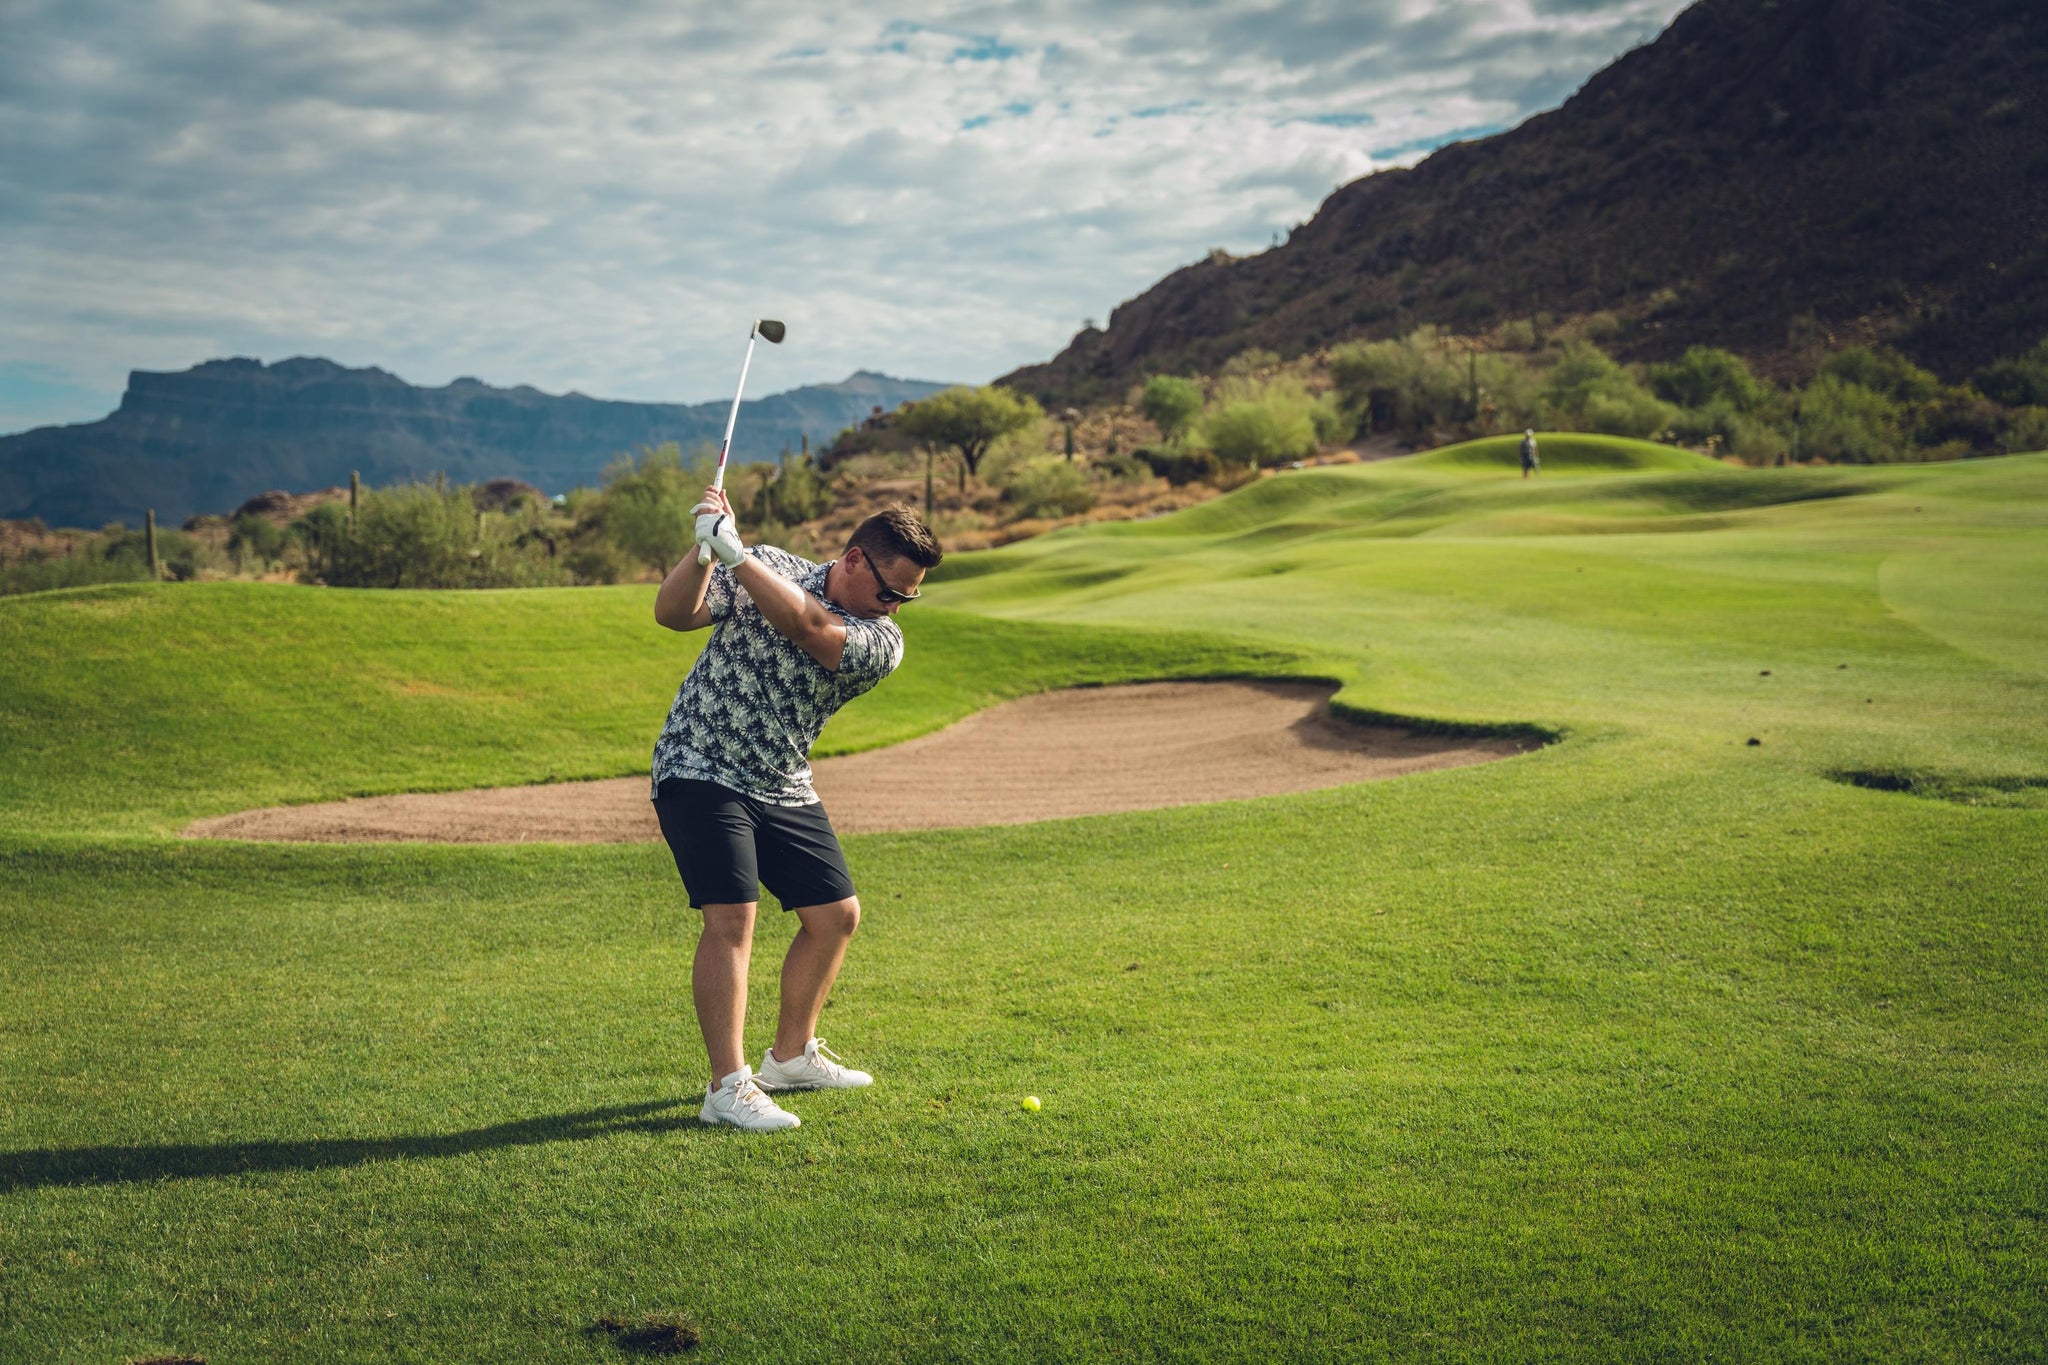 Top 5 Golf Travel Destinations Across the United States